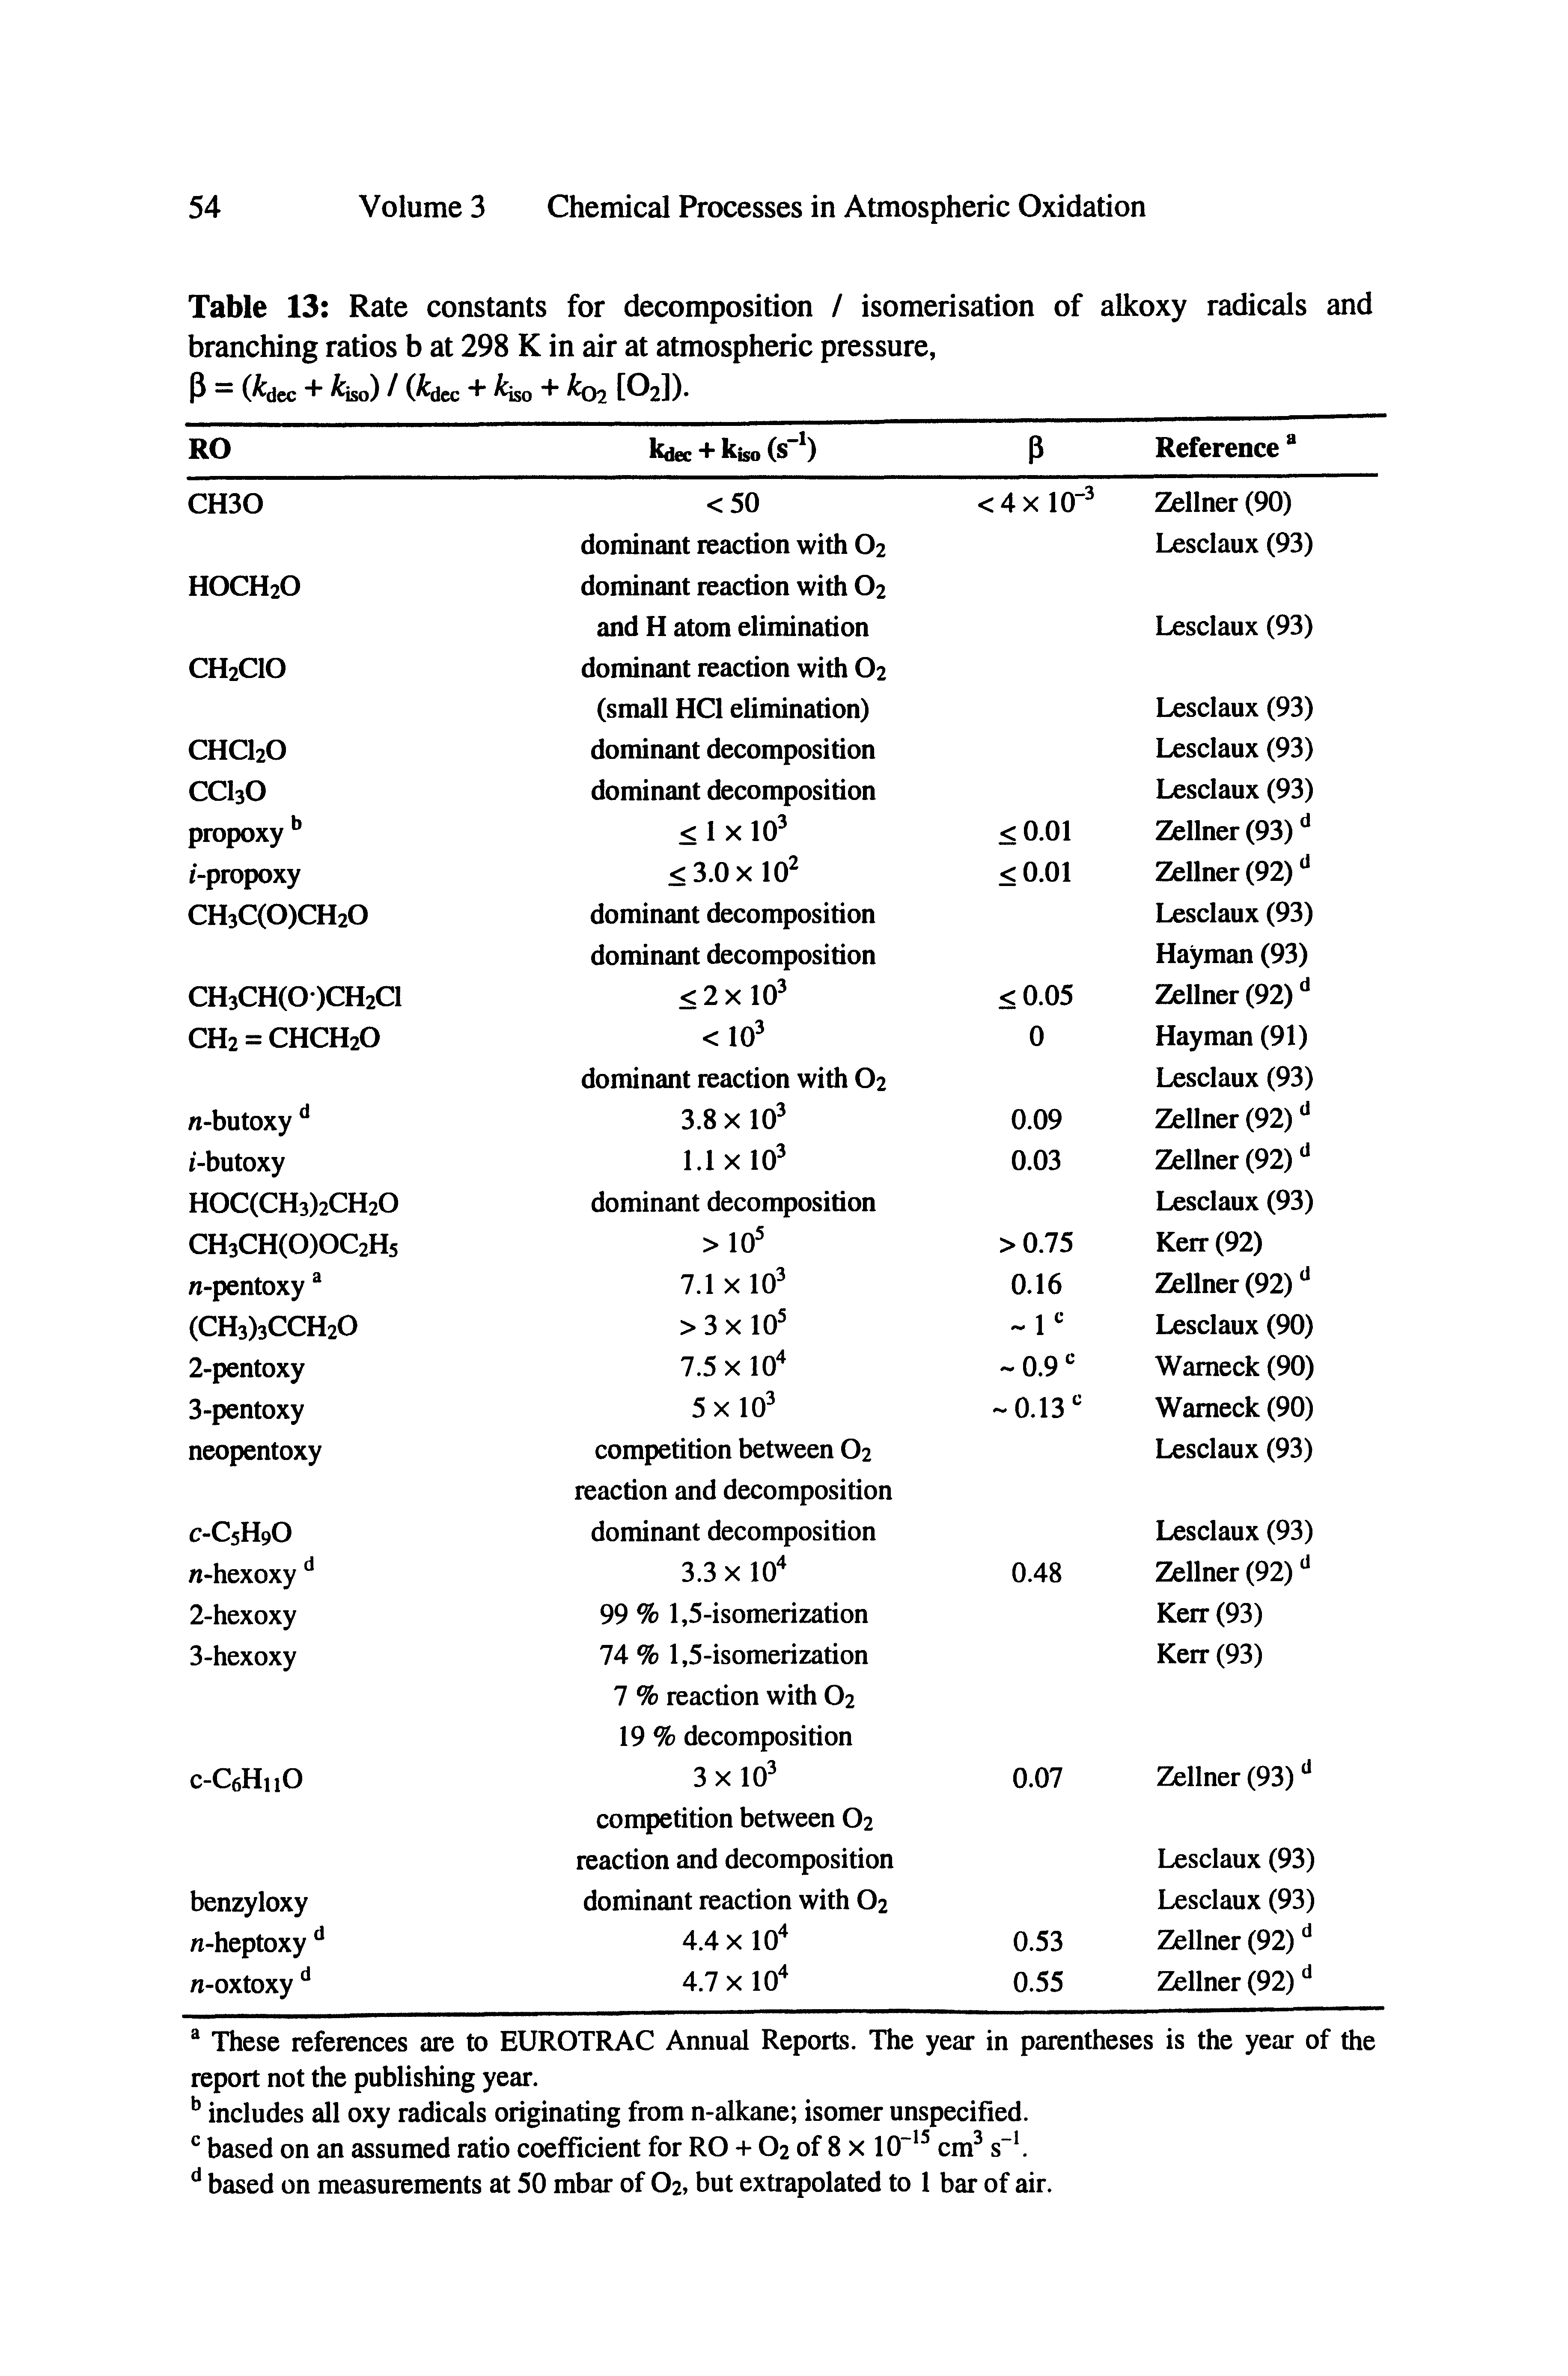 Table 13 Rate constants for decomposition / isomerisation of alkoxy radicals and branching ratios b at 298 K in air at atmospheric pressure,...